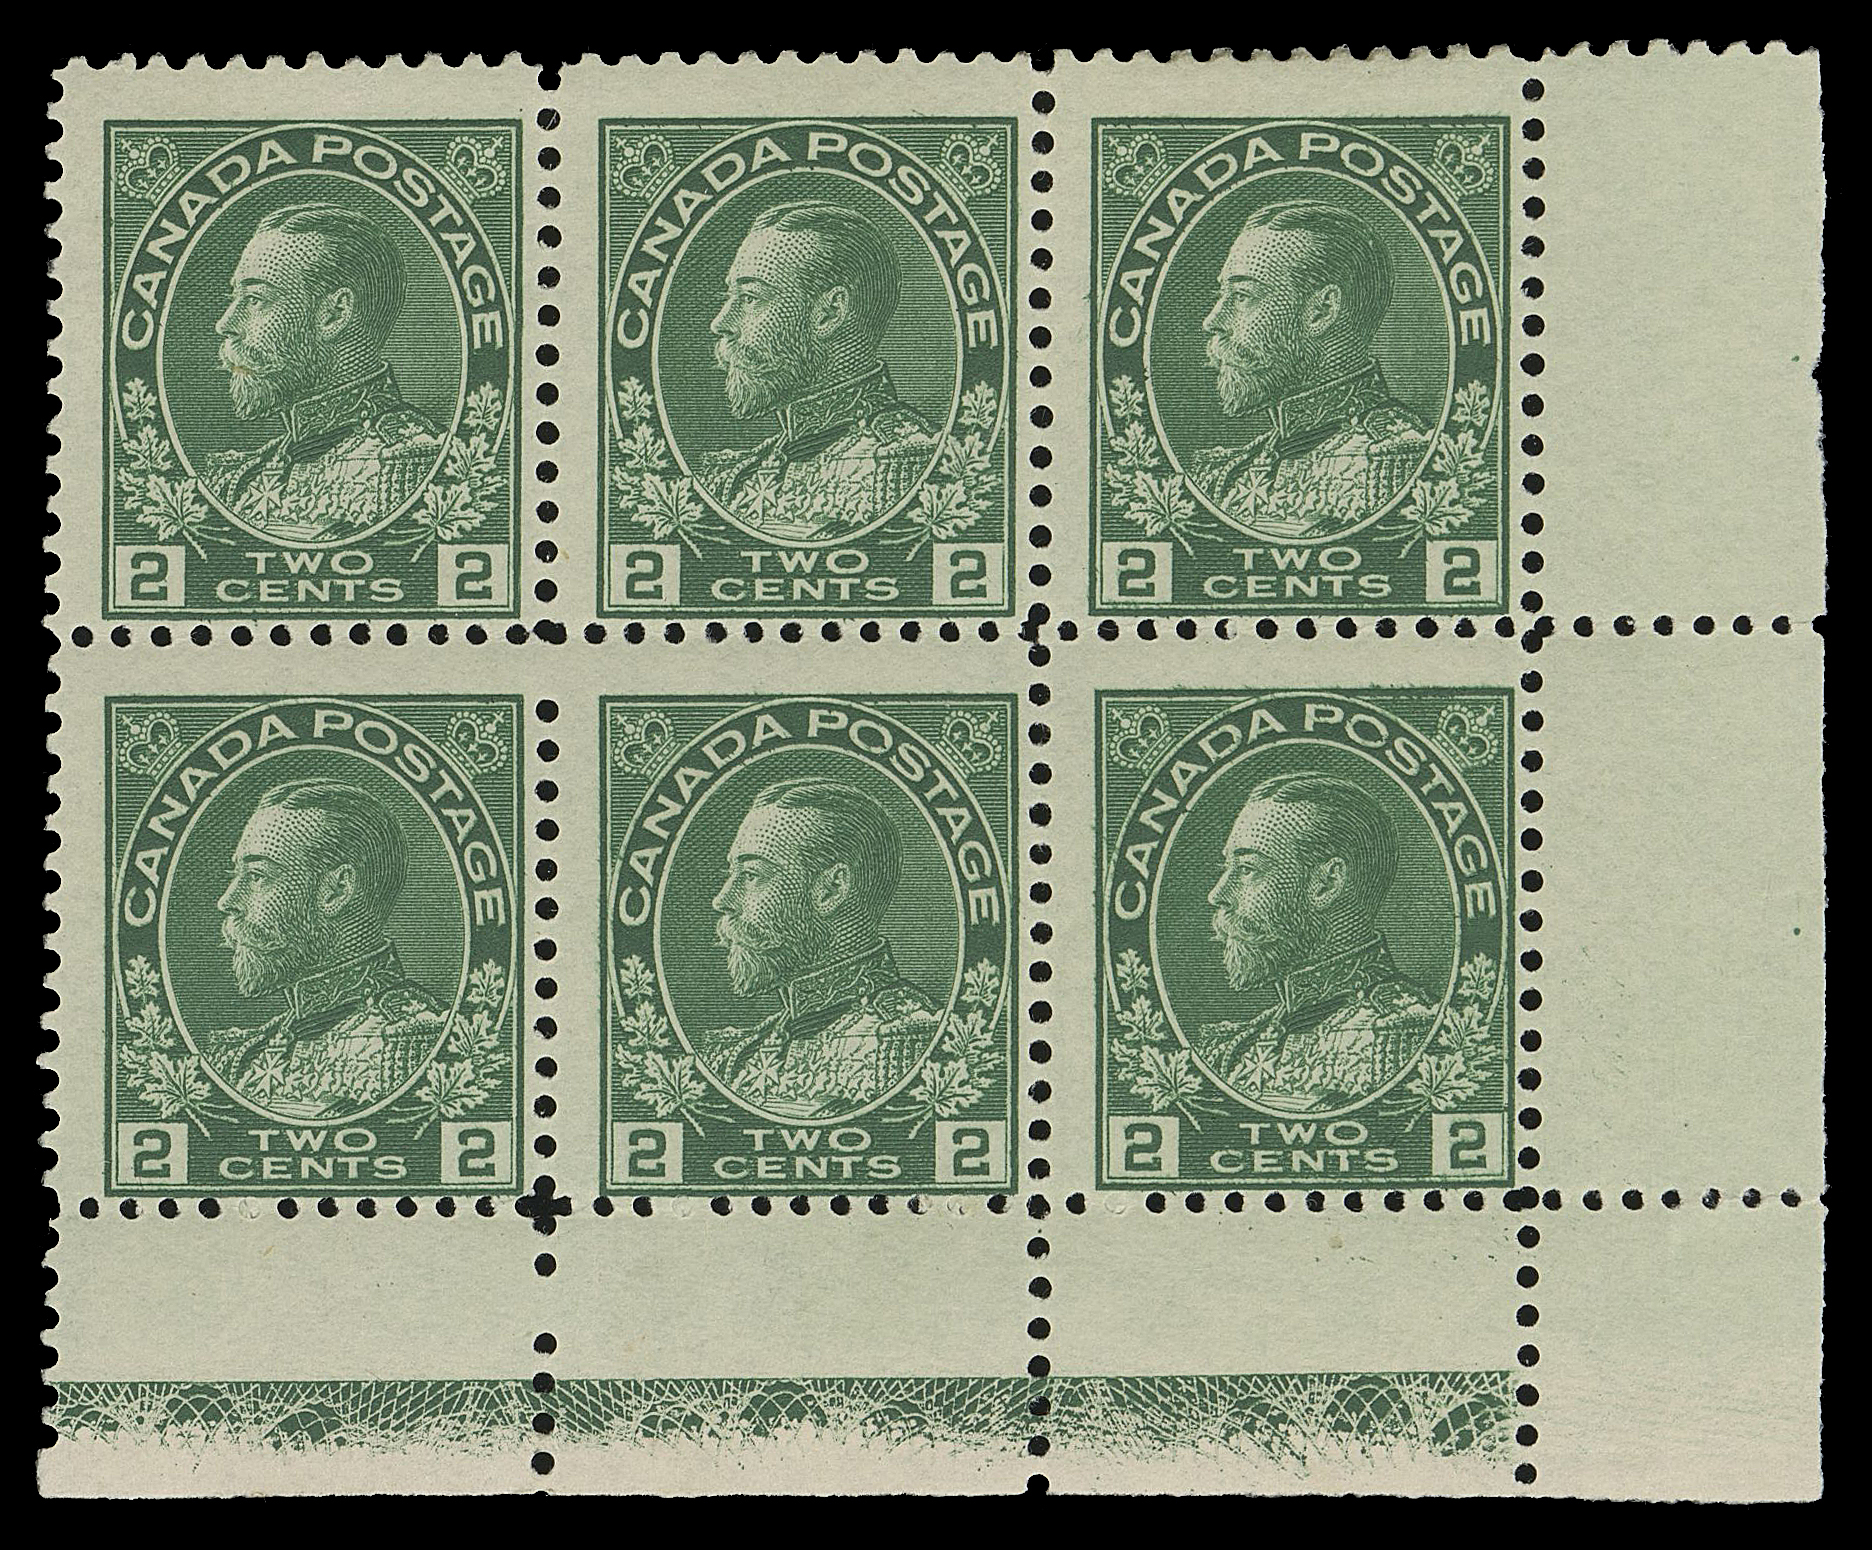 ADMIRAL STAMPS  107i variety,Lower right mint block of six displaying Type D lathework on a distinctively horizontal mesh paper - very rarely seen (has eluded specialists for many years since it was discovered and reported by Hans Reiche in the 1970s) and resulting in an interesting "Squat" printing; top row hinged, lower row and lathework margin NH. A fabulous item for an advanced collection, Fine

Provenance: "Bessemer" Admiral Collection, Eastern Auctions, October 2013; Lot 1728